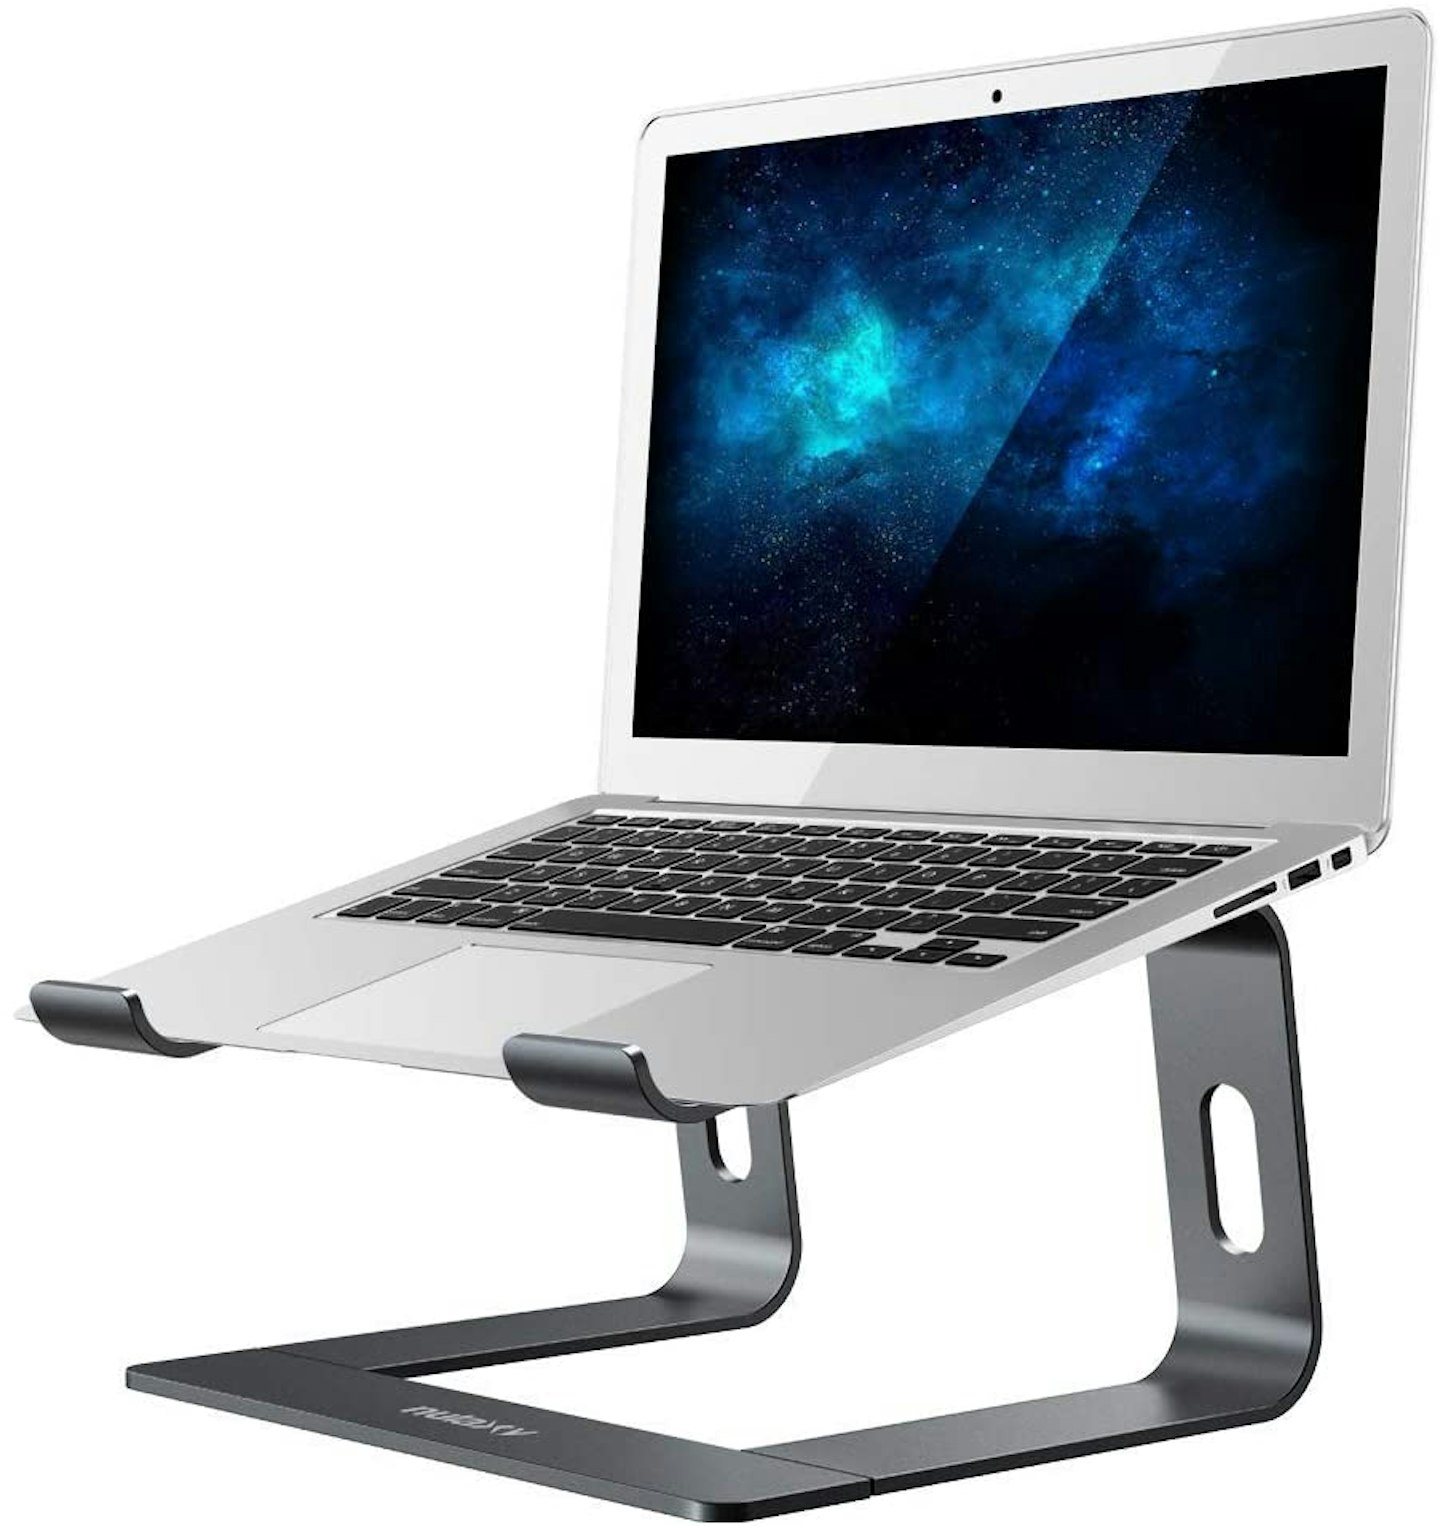 NULAXY Laptop Stand